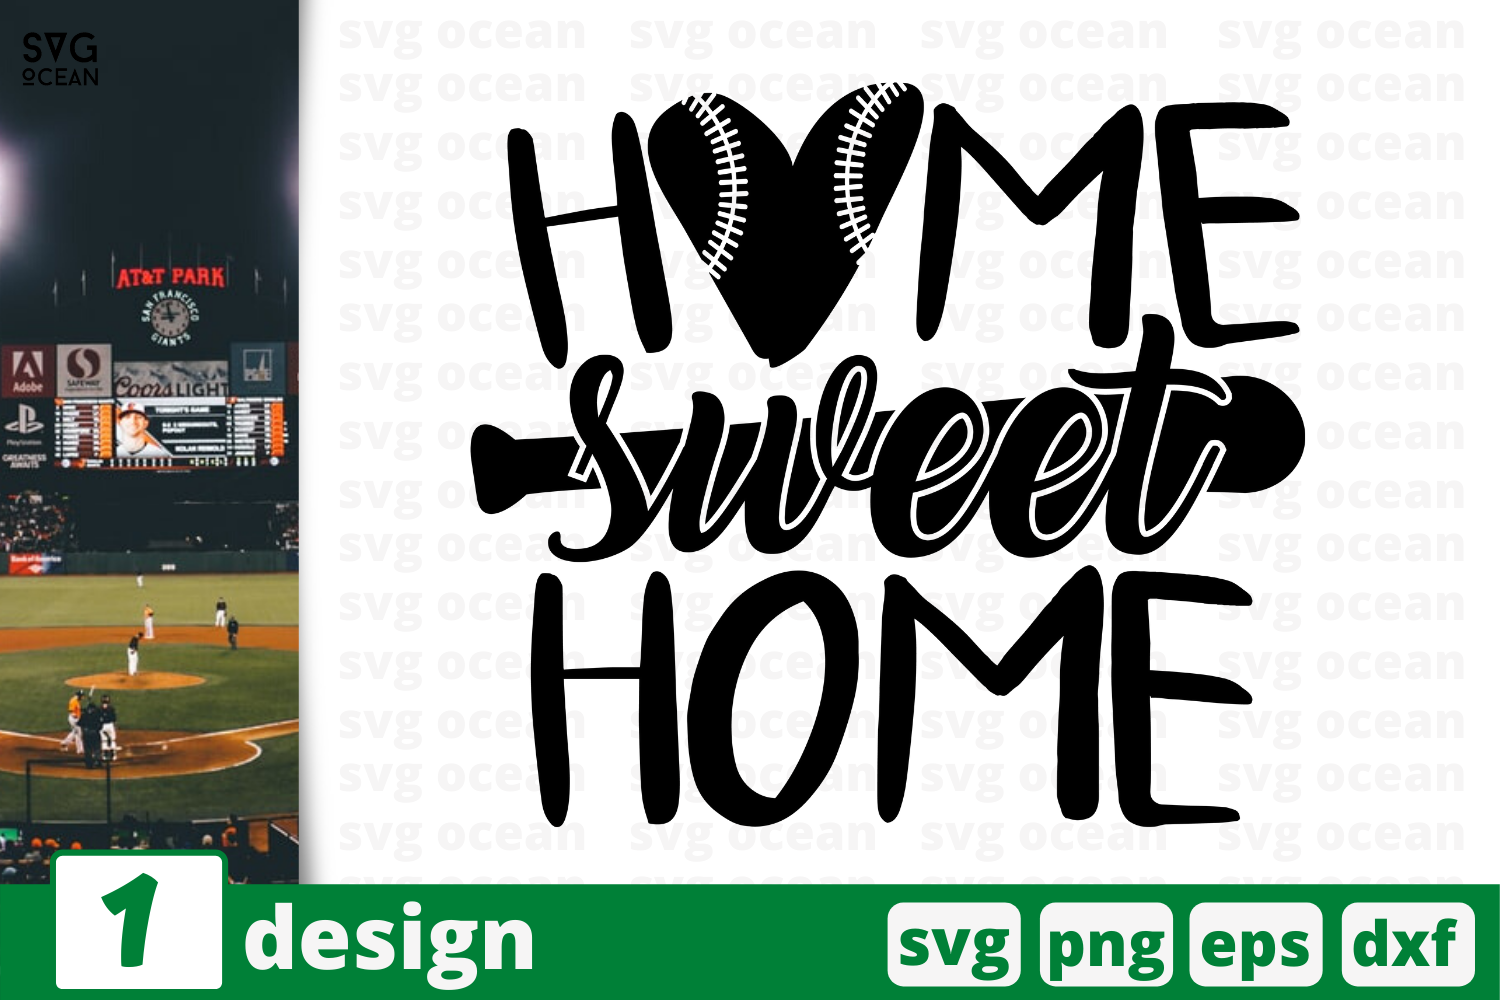 Download 1 Home Sweet Home Svg Bundle Quotes Cricut Svg By Svgocean Thehungryjpeg Com